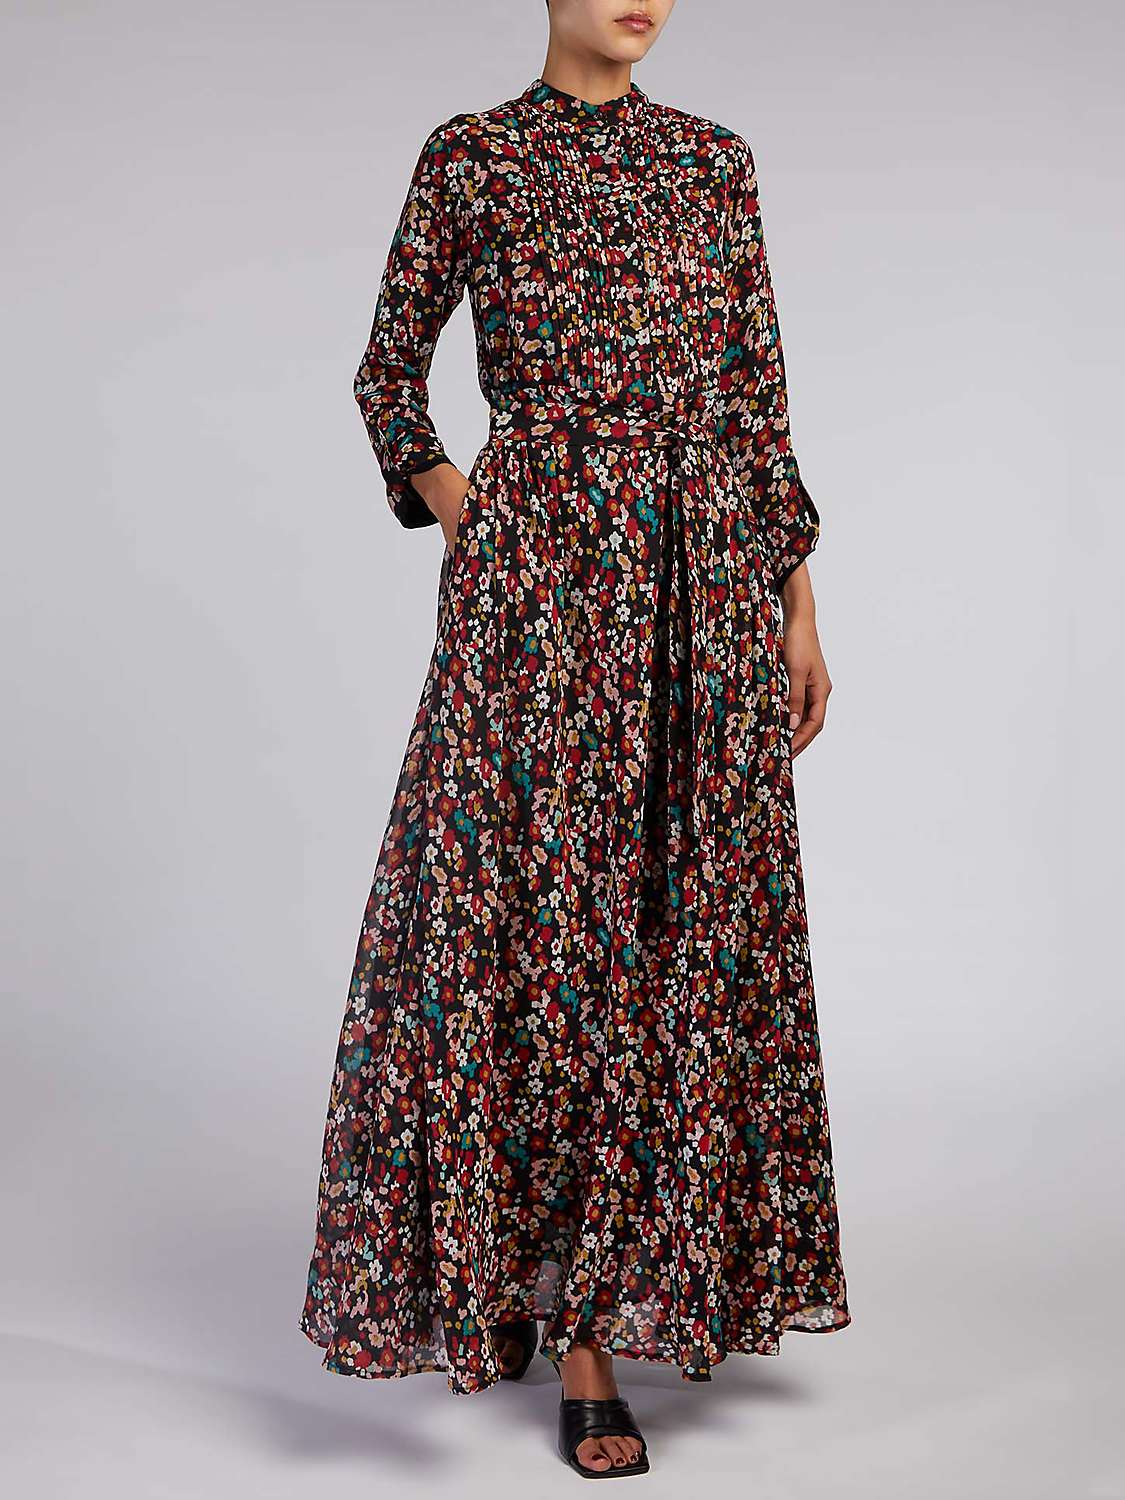 Buy Aab Ditsy Daisy Print Maxi Dress, Red Online at johnlewis.com